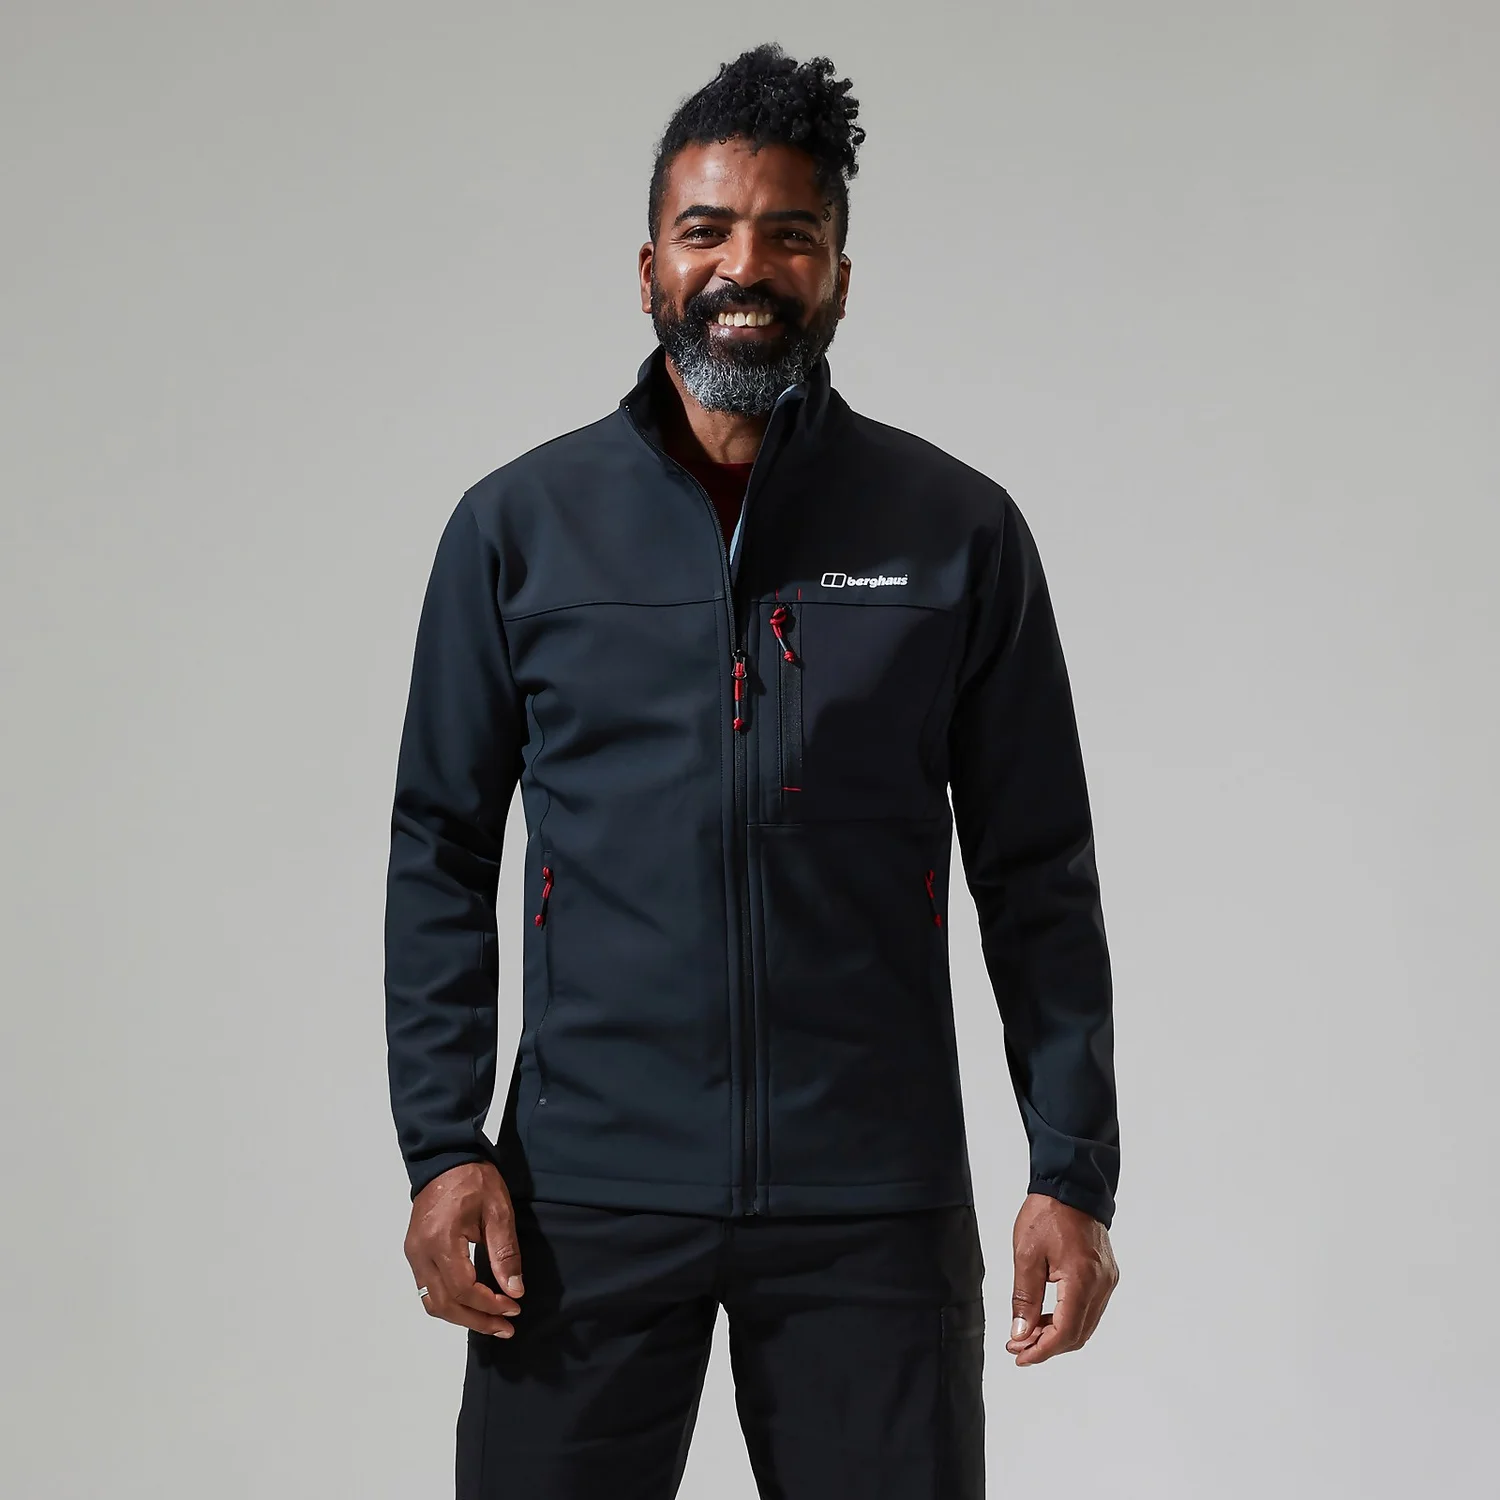 Unlock Wilderness' choice in the Berghaus Vs North Face comparison, the Ghlas 2.0 Softshell Jacket by Berghaus